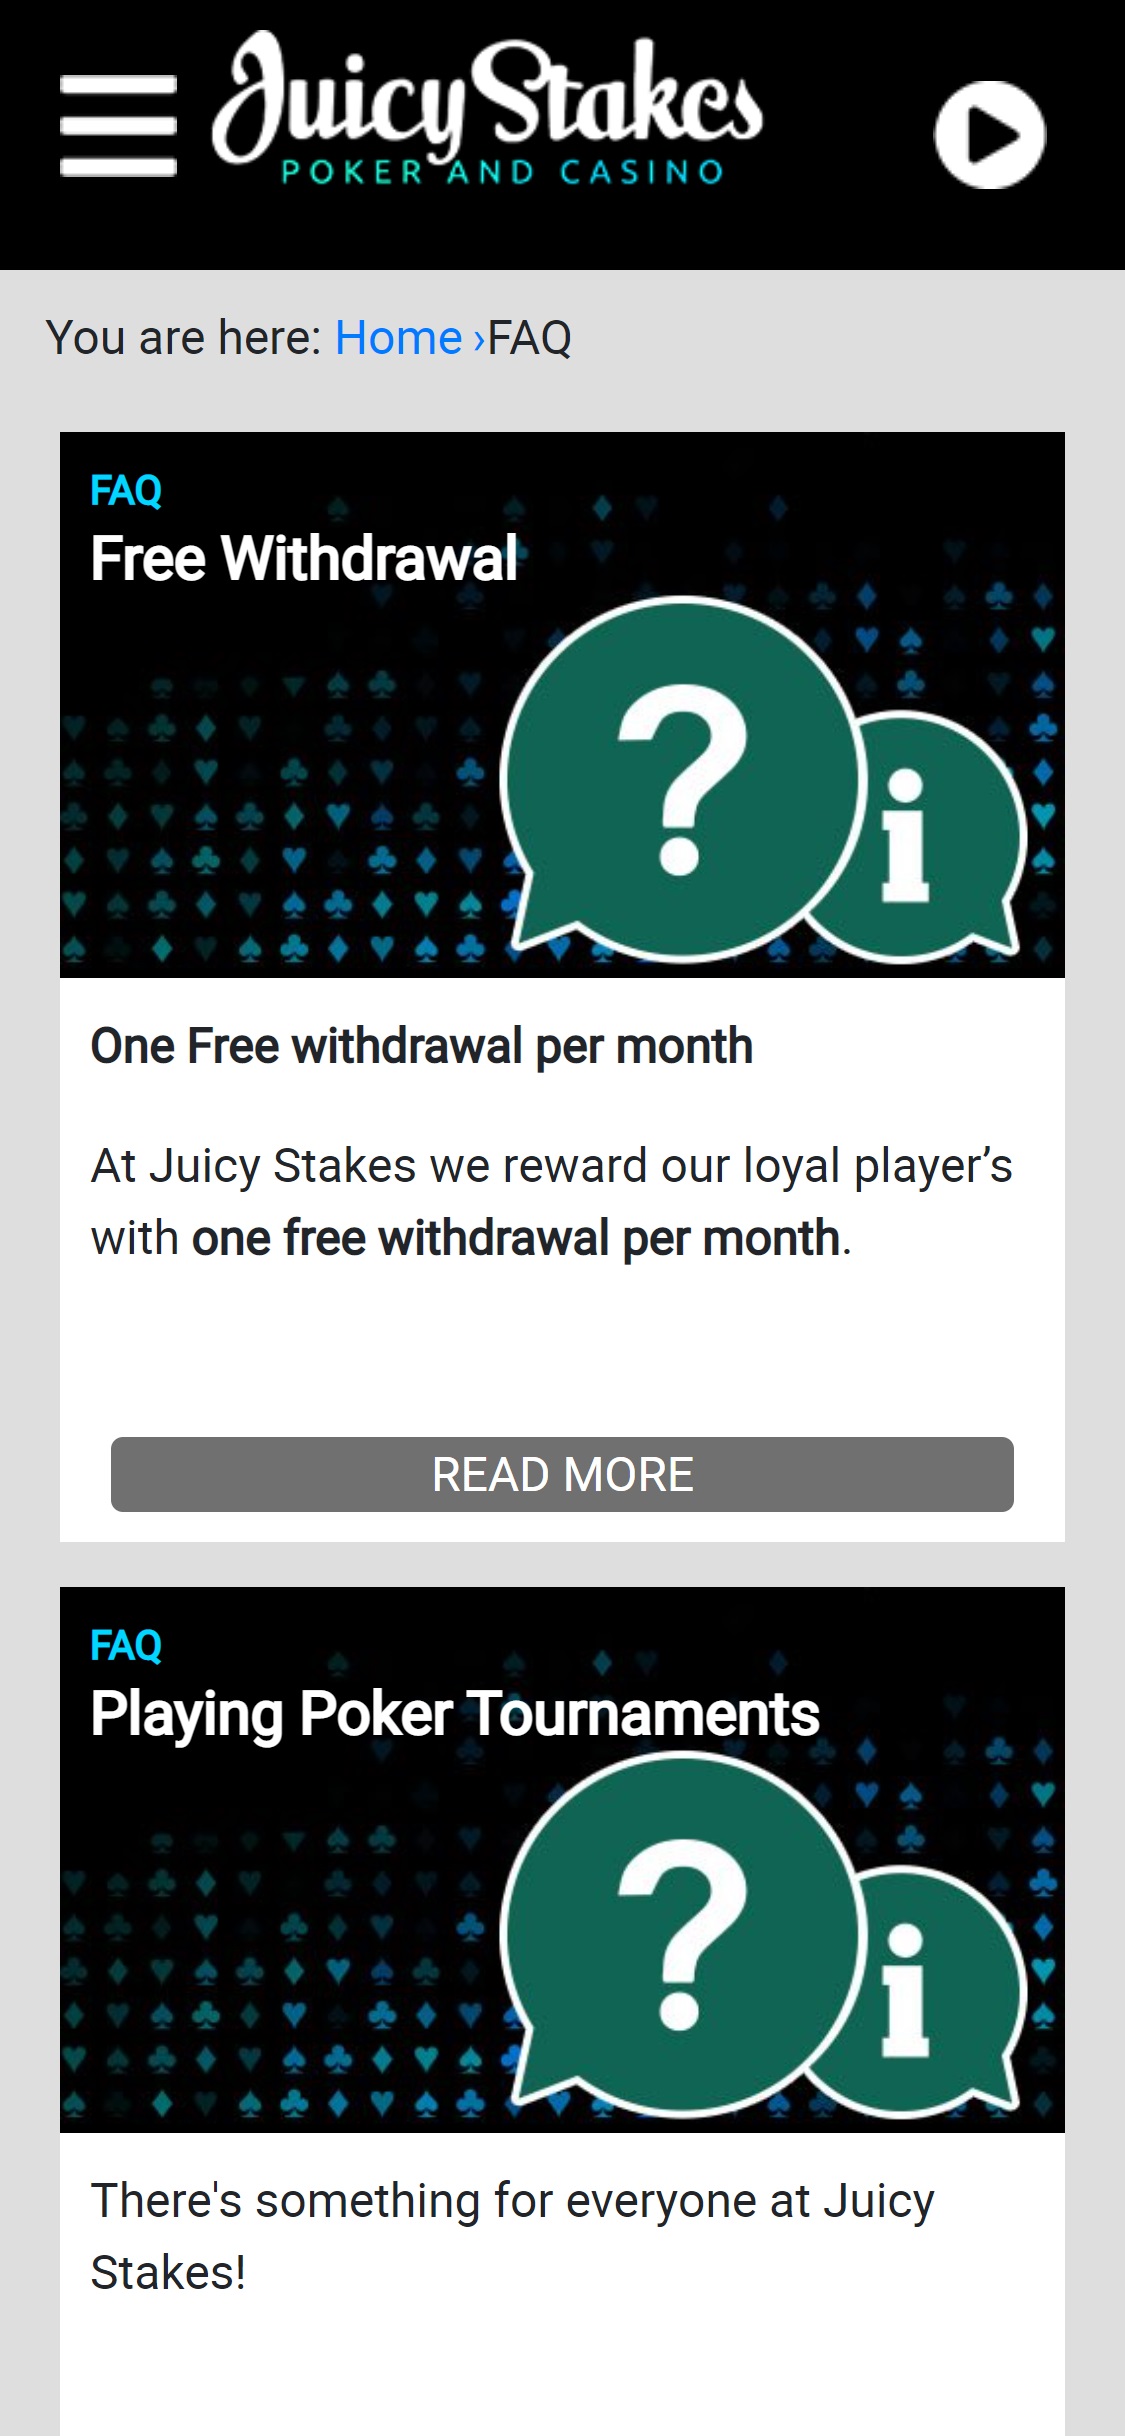 Juicy Stakes Casino Mobile Support Review